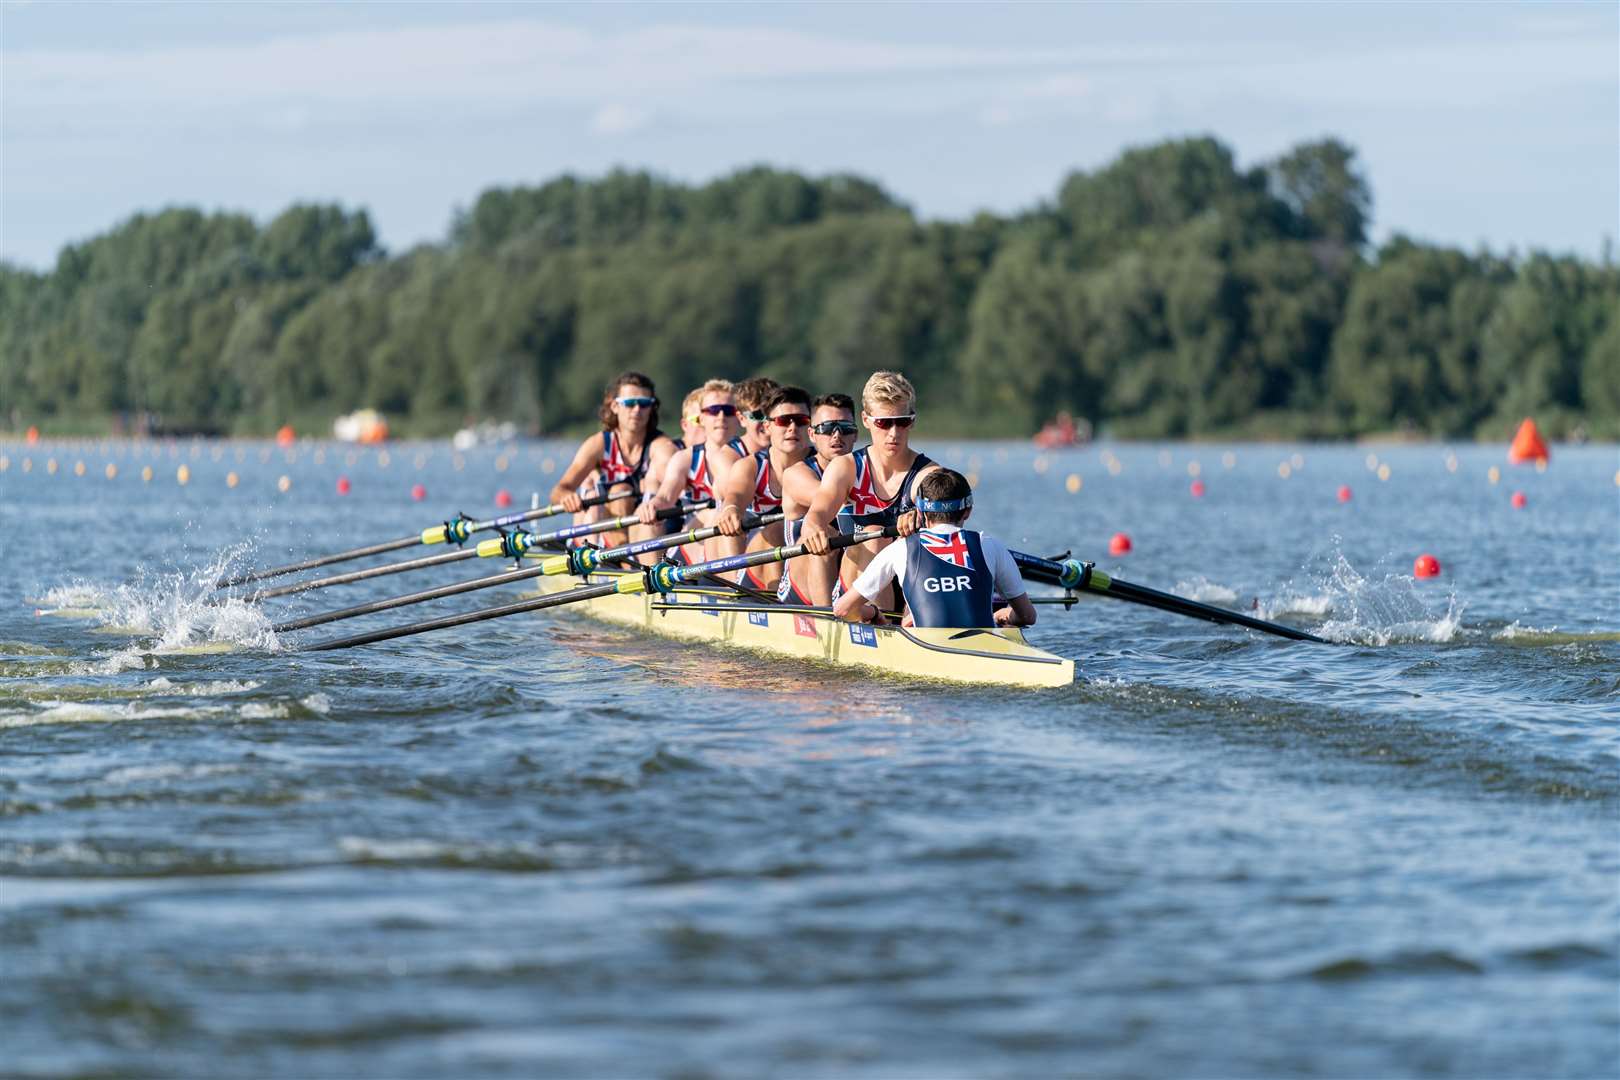 Freddie Allinson, immediately in front of the cox, helps Great Britain to glory at the U23 European Championships in Poland Picture: AllMarkOne